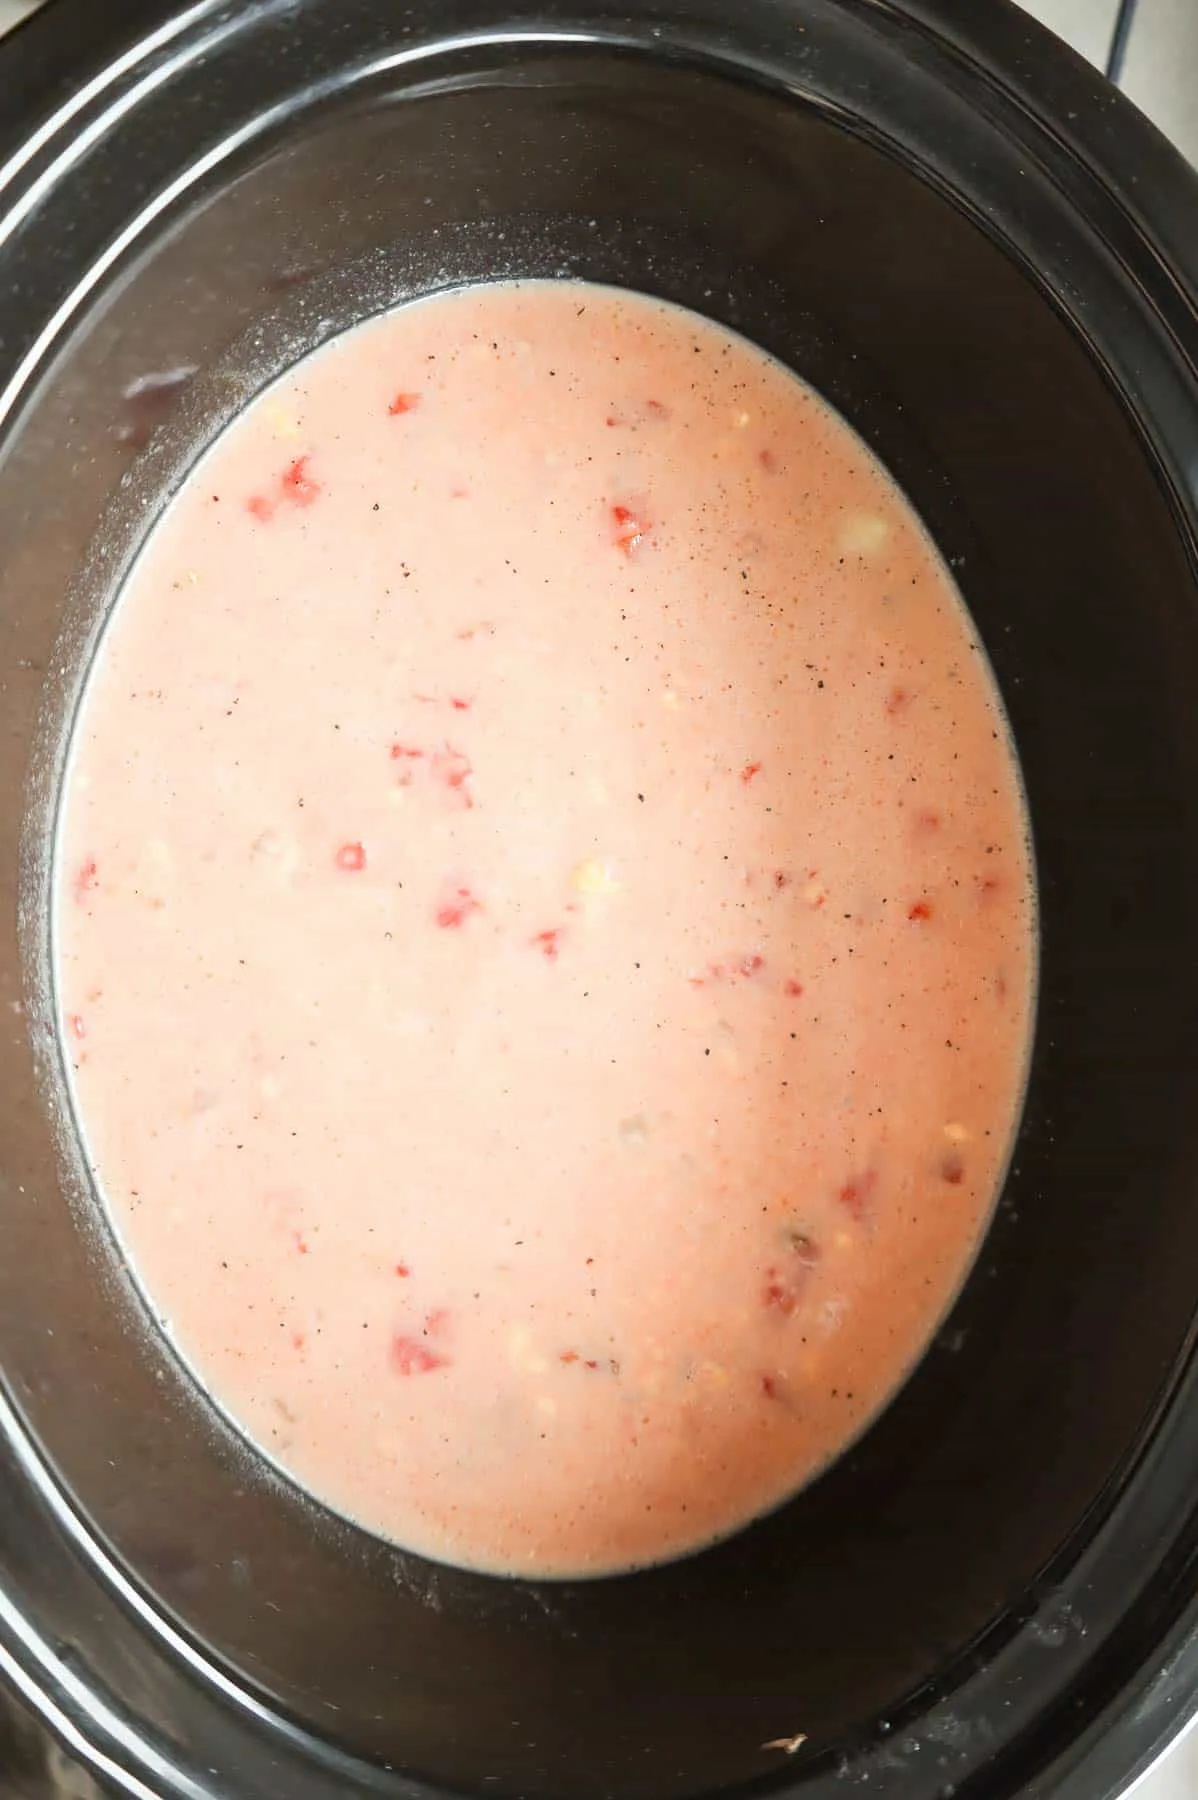 milk, broth, tomato and cheese soup mixture in a crock pot